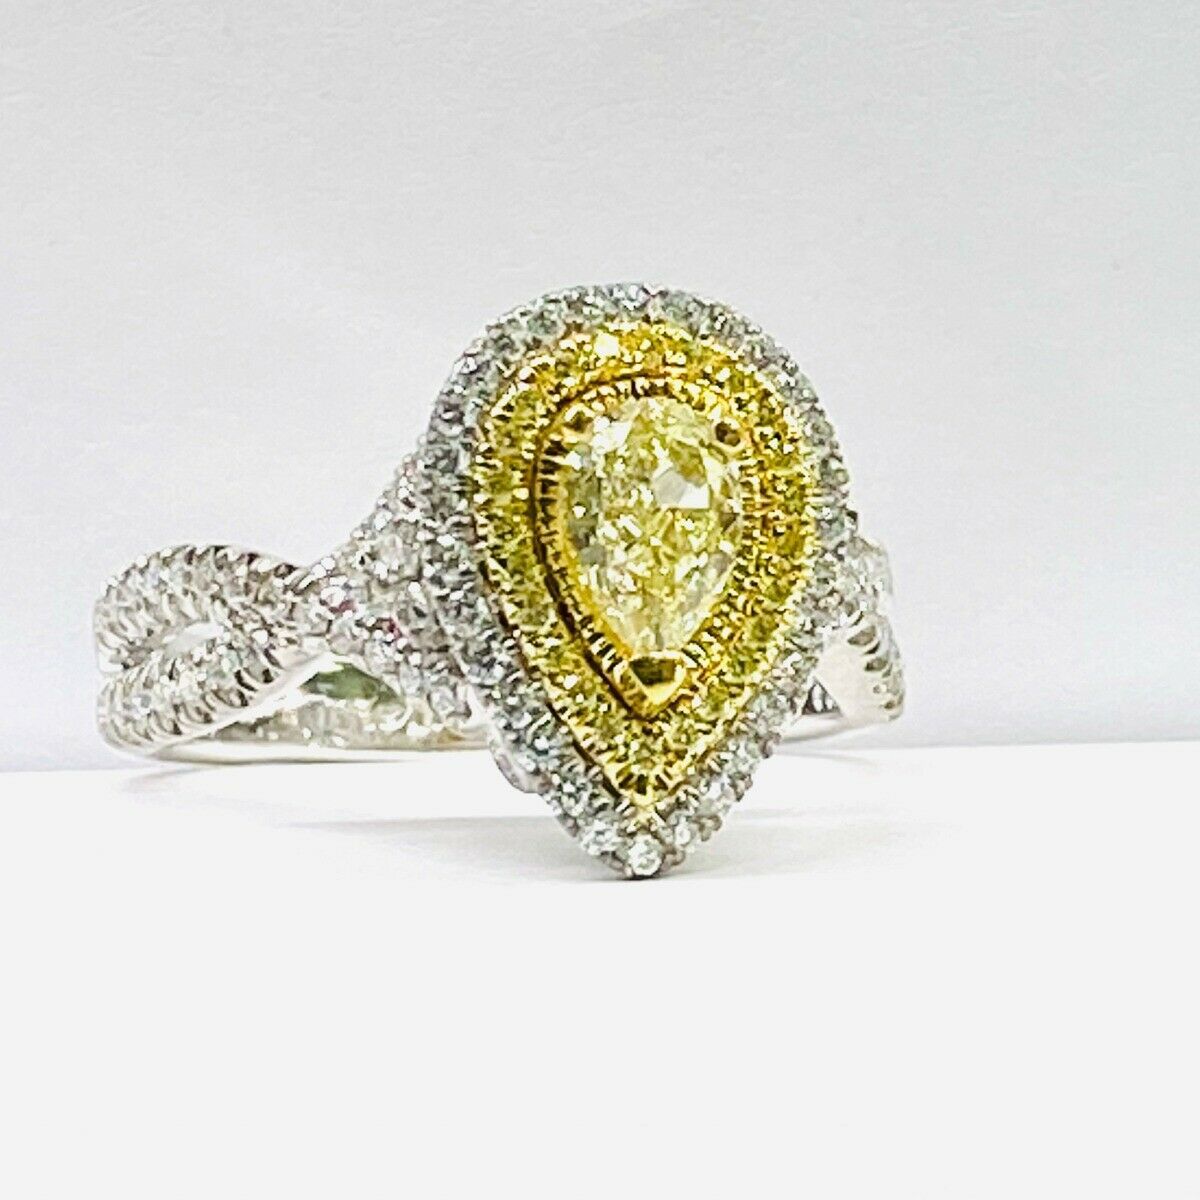 Primary image for 1.24 Ct Pear Cut Yellow Diamond Engagement Infinity Ring 14k White Gold